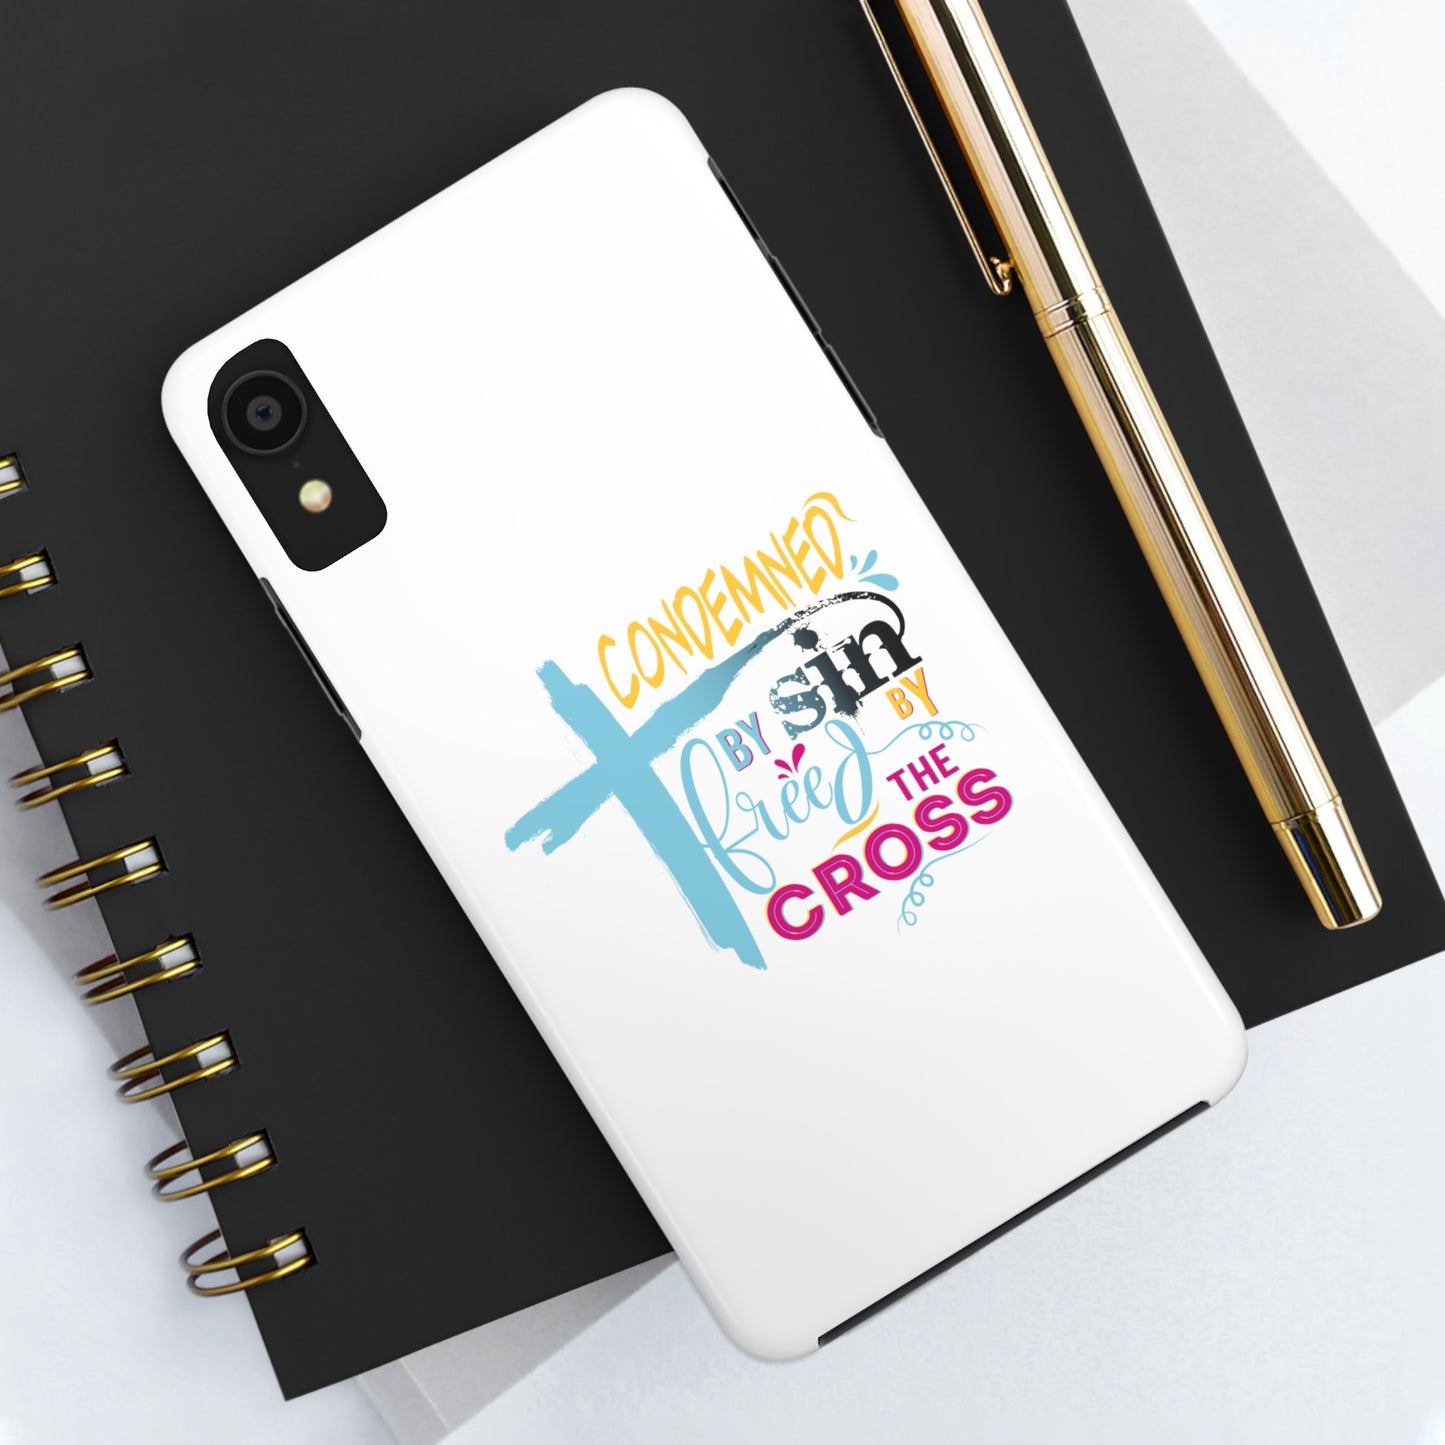 Condemned By Sin Freed By The Cross Tough Phone Cases, Case-Mate